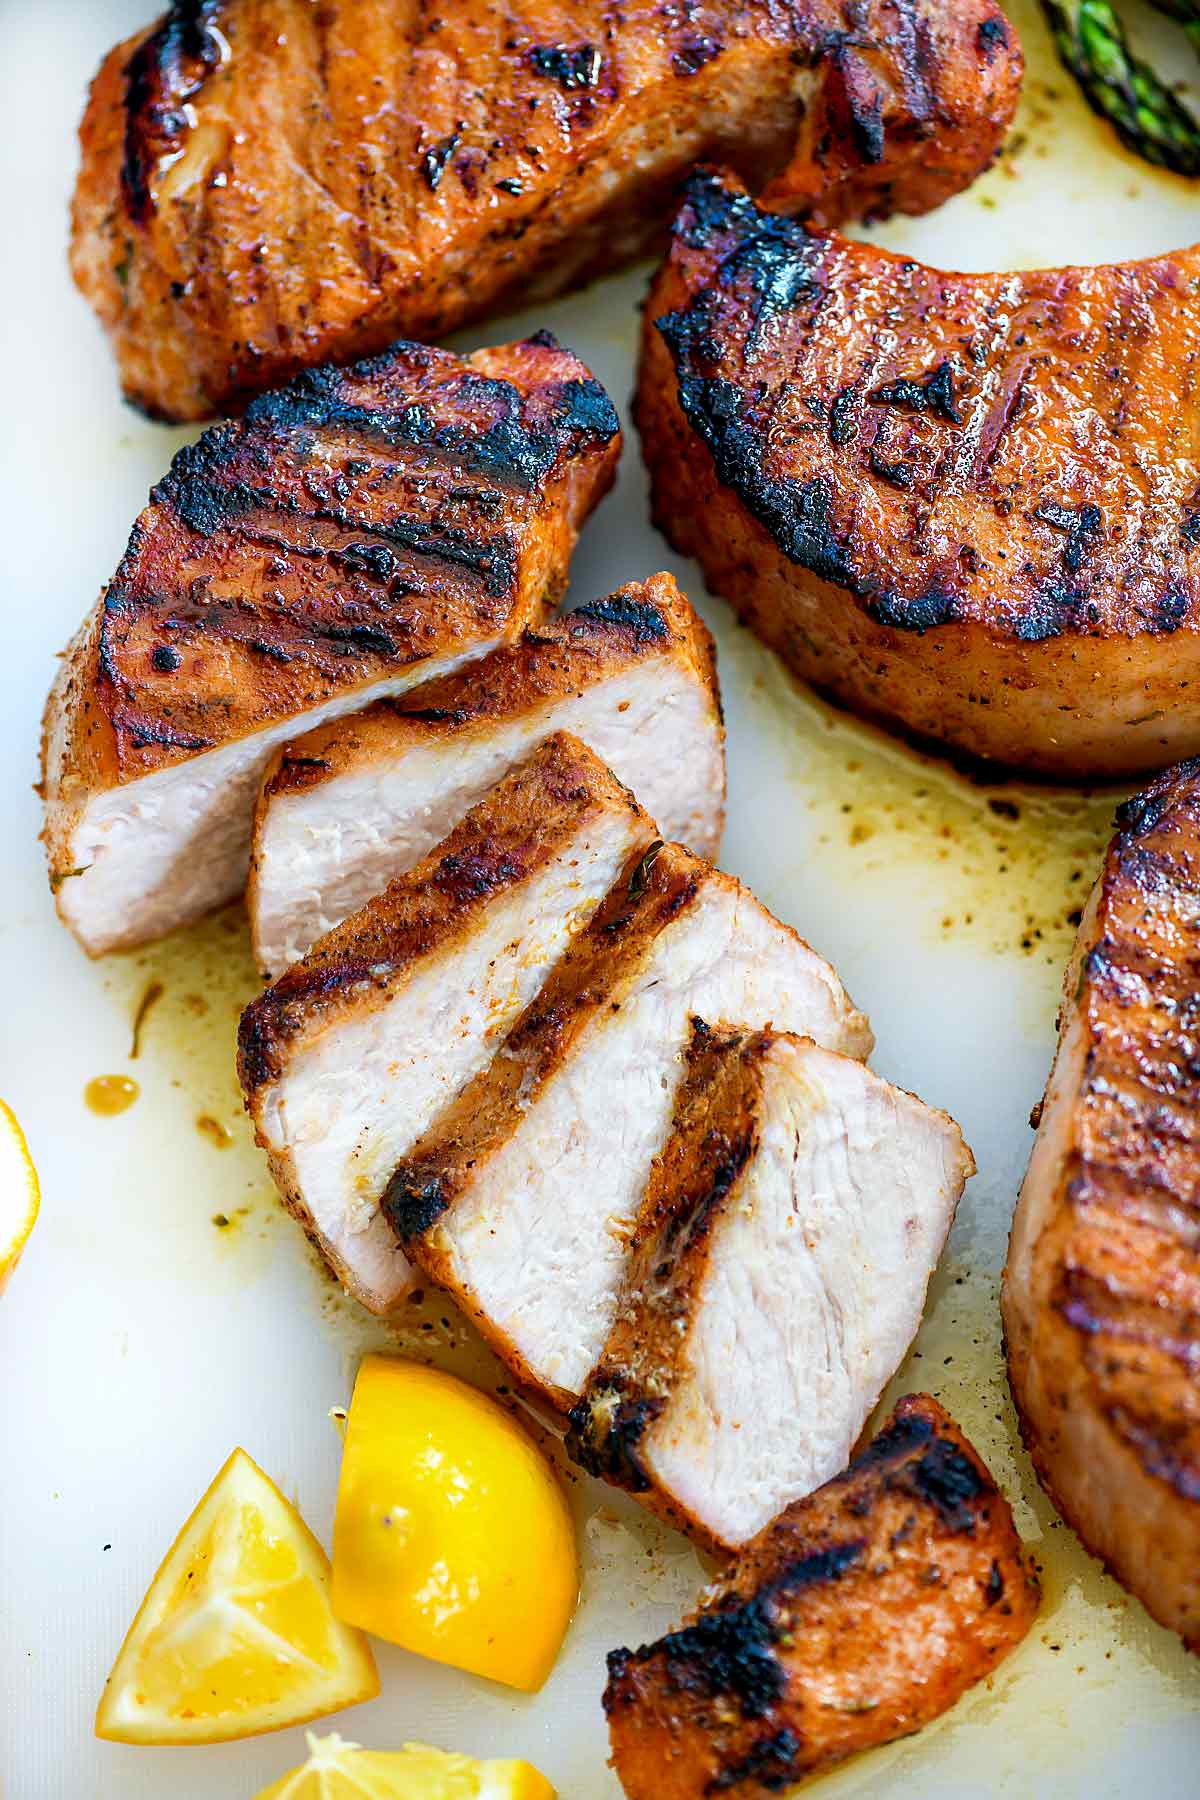 The Best Juicy Grilled Pork Chops Foodiecrush Com,Nintendo Wii Games For Kids